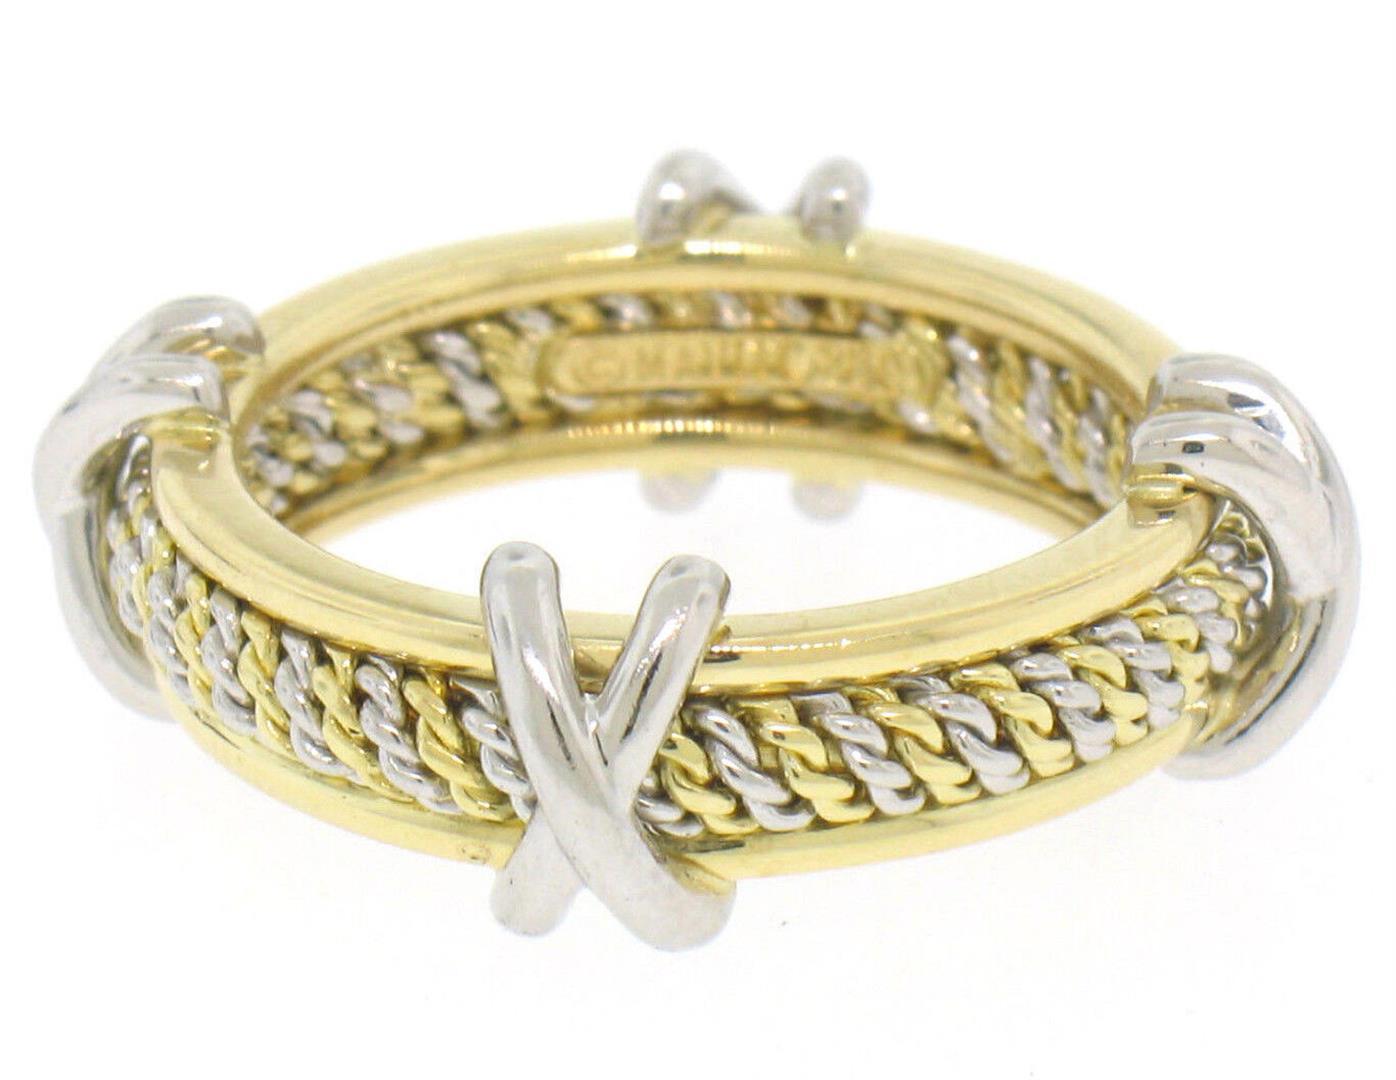 Mavito Solid Platinum 18k Yellow Gold Twisted Wire & X Eternity Band Ring Sz 5.5